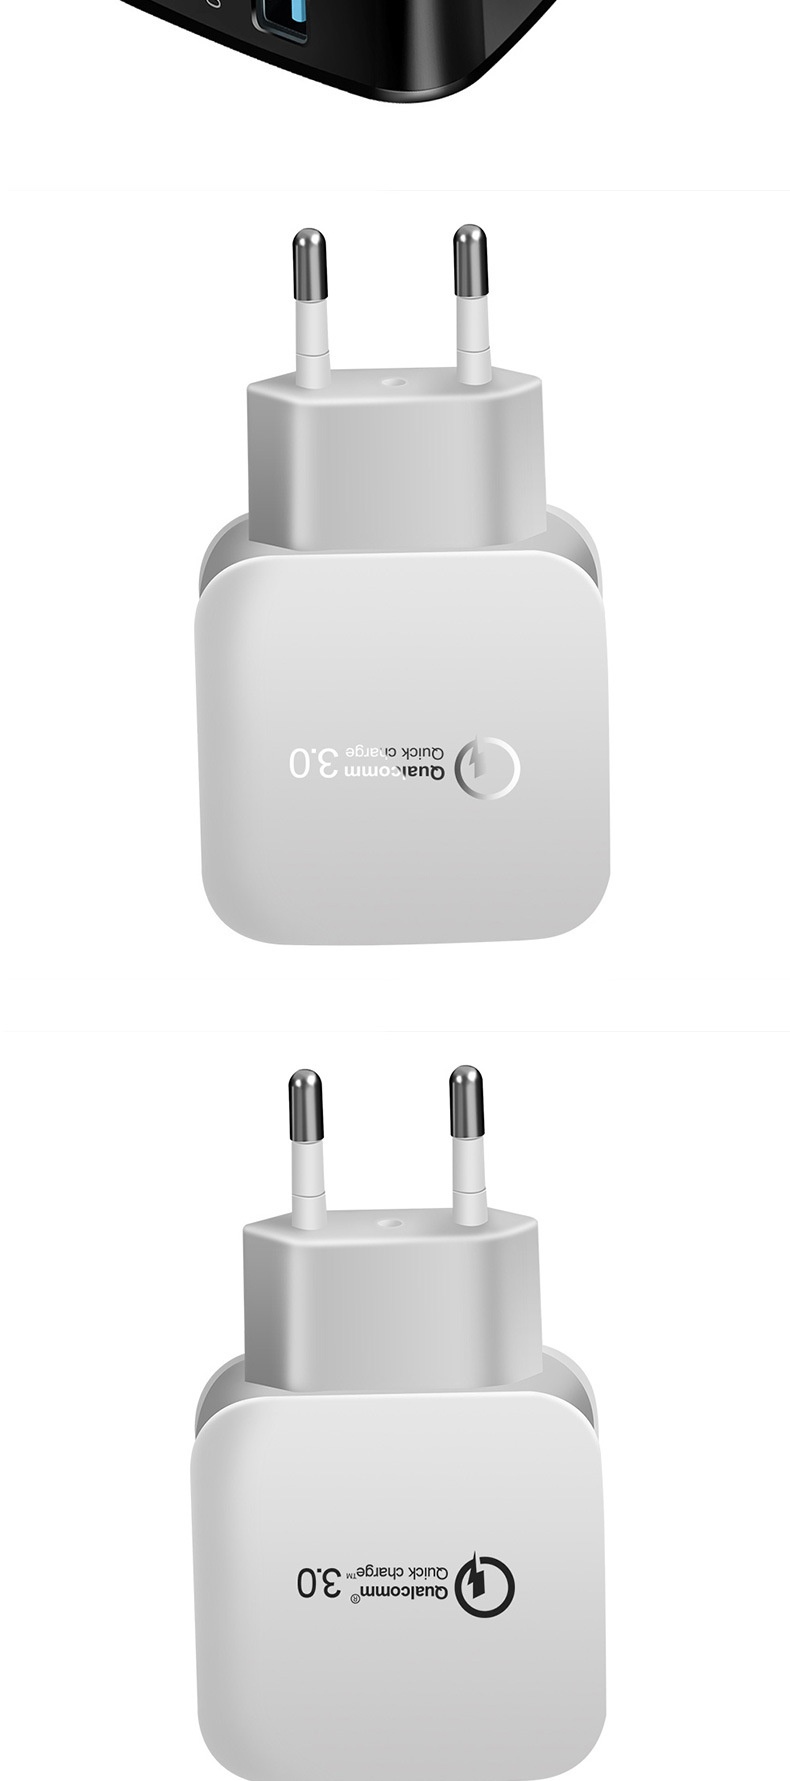 Marjay-18W-15W-QC30-Fast-Charging-USB-Charger-Adapter-For-iPhone-XS-11-Pro-Huawei-P30-Pro-Mate-30-Xi-1582085